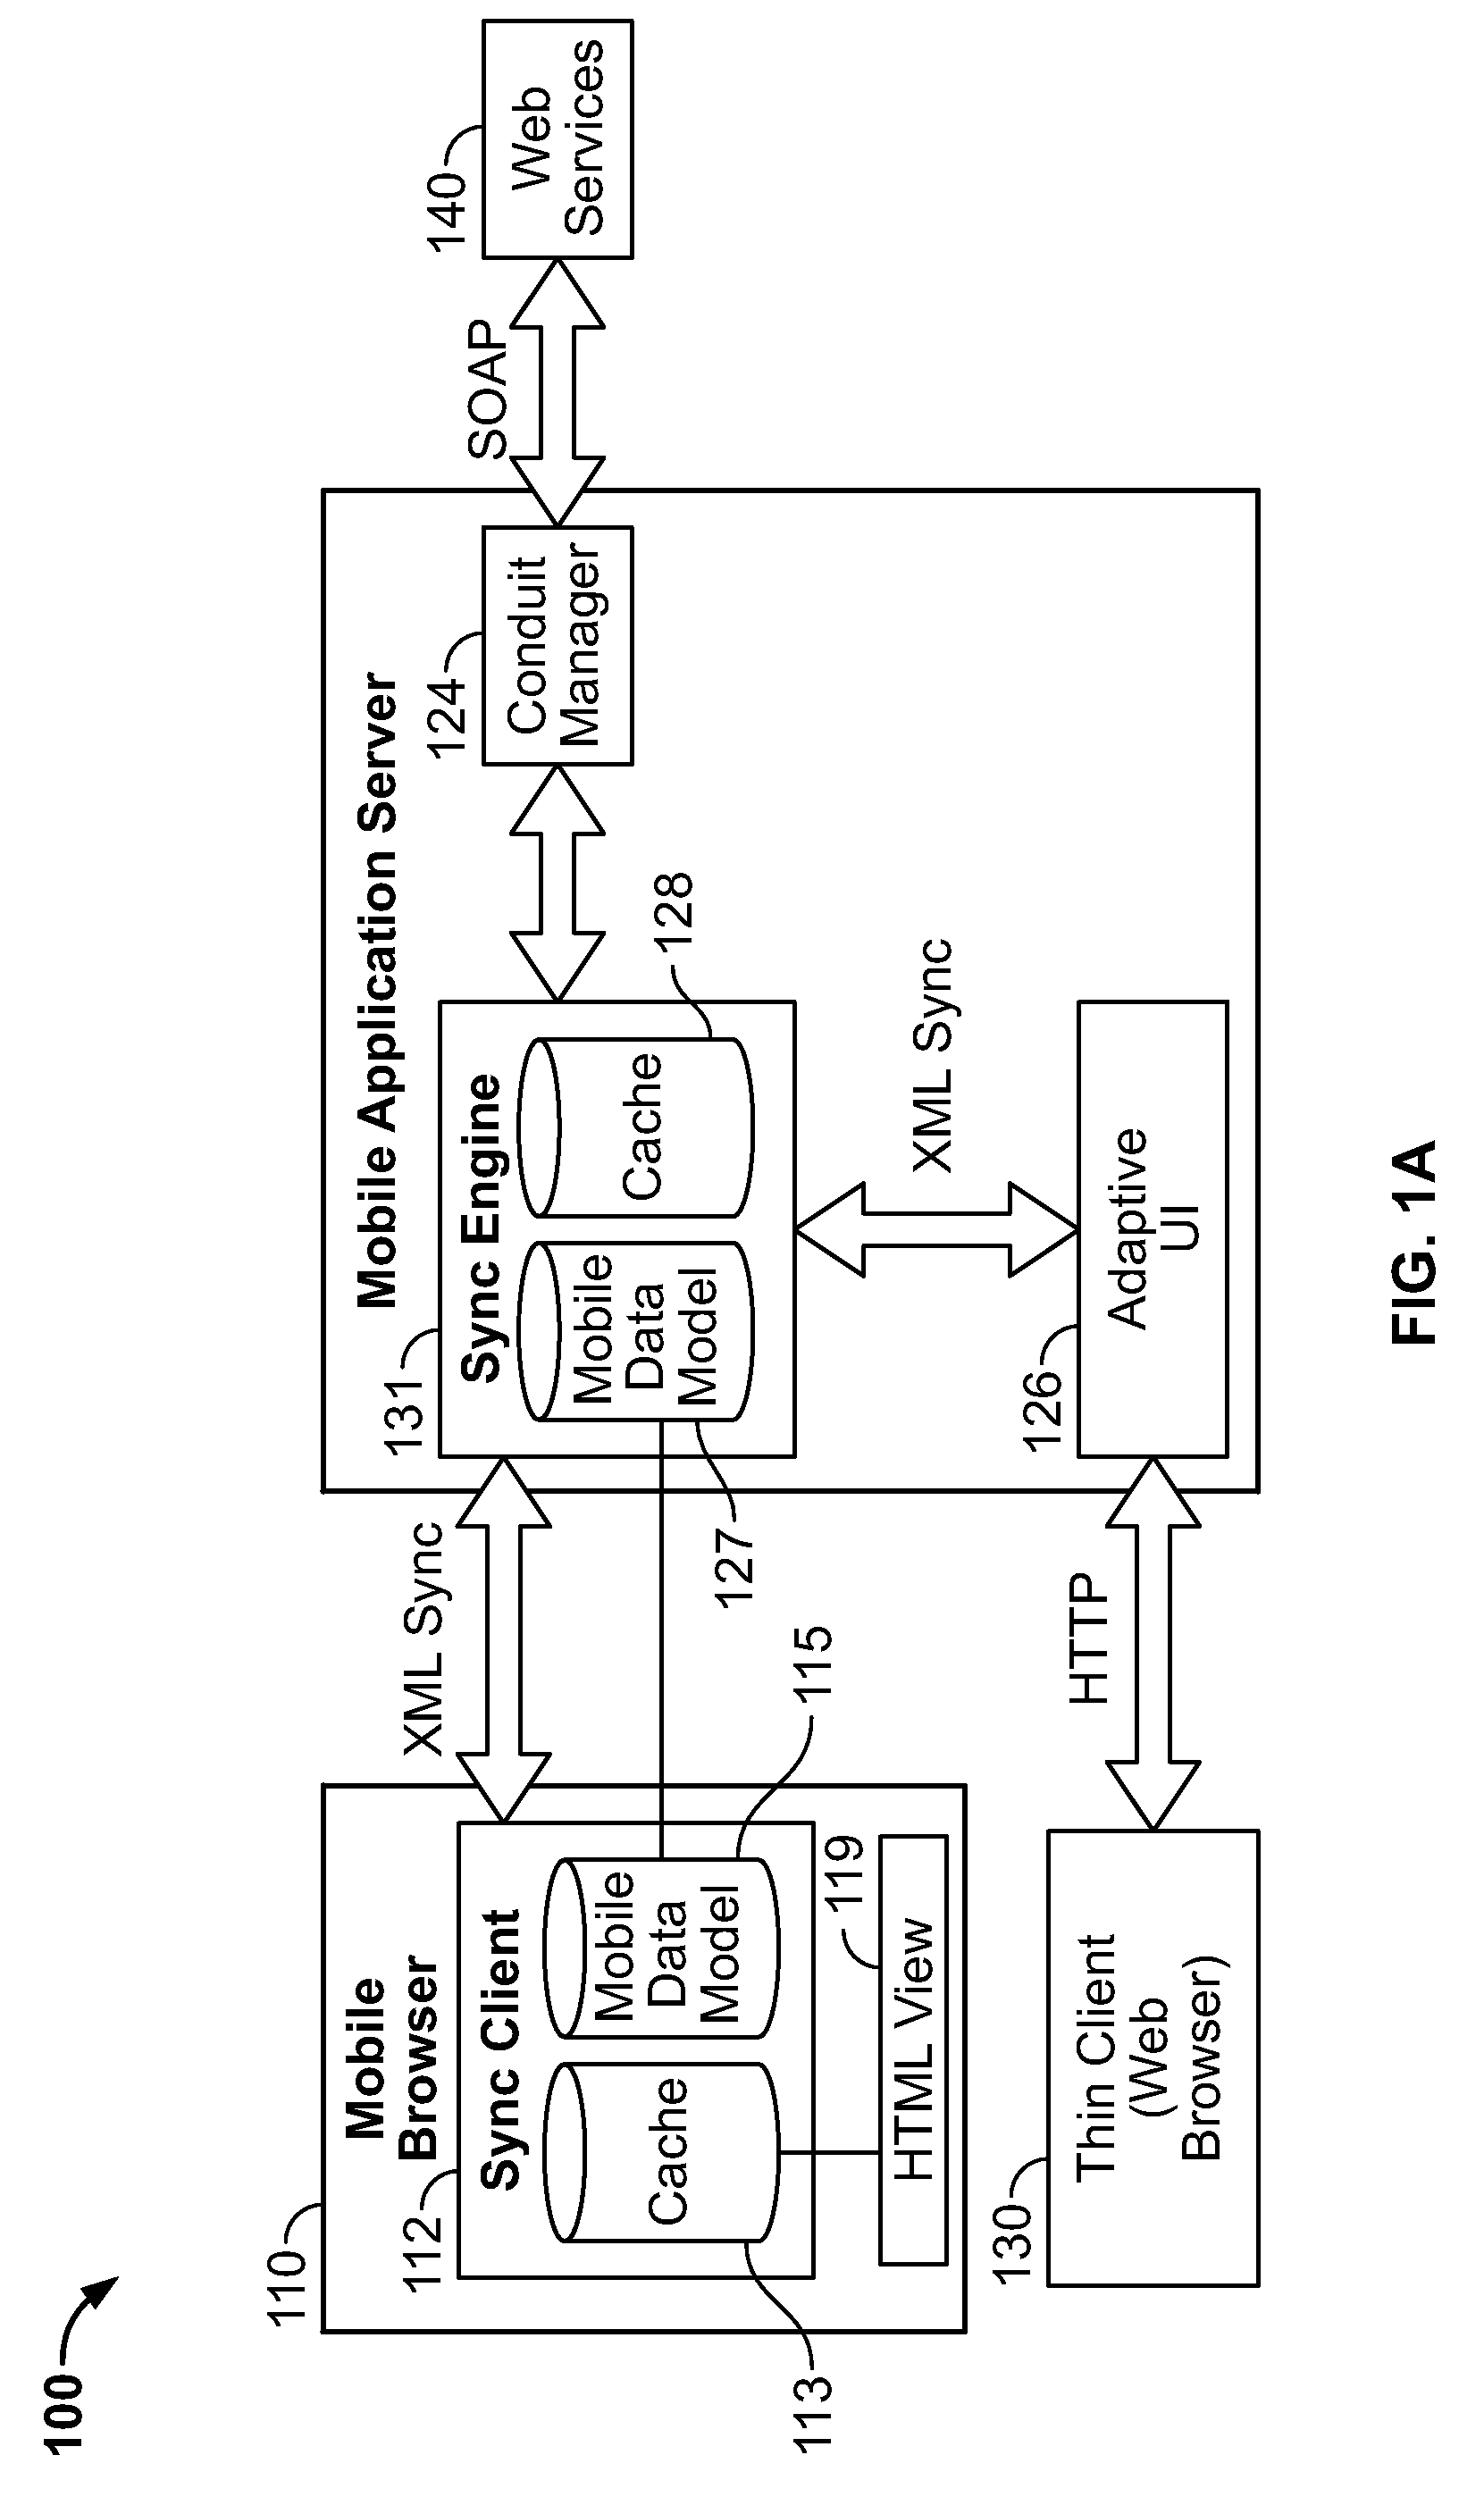 Mobile application cache system